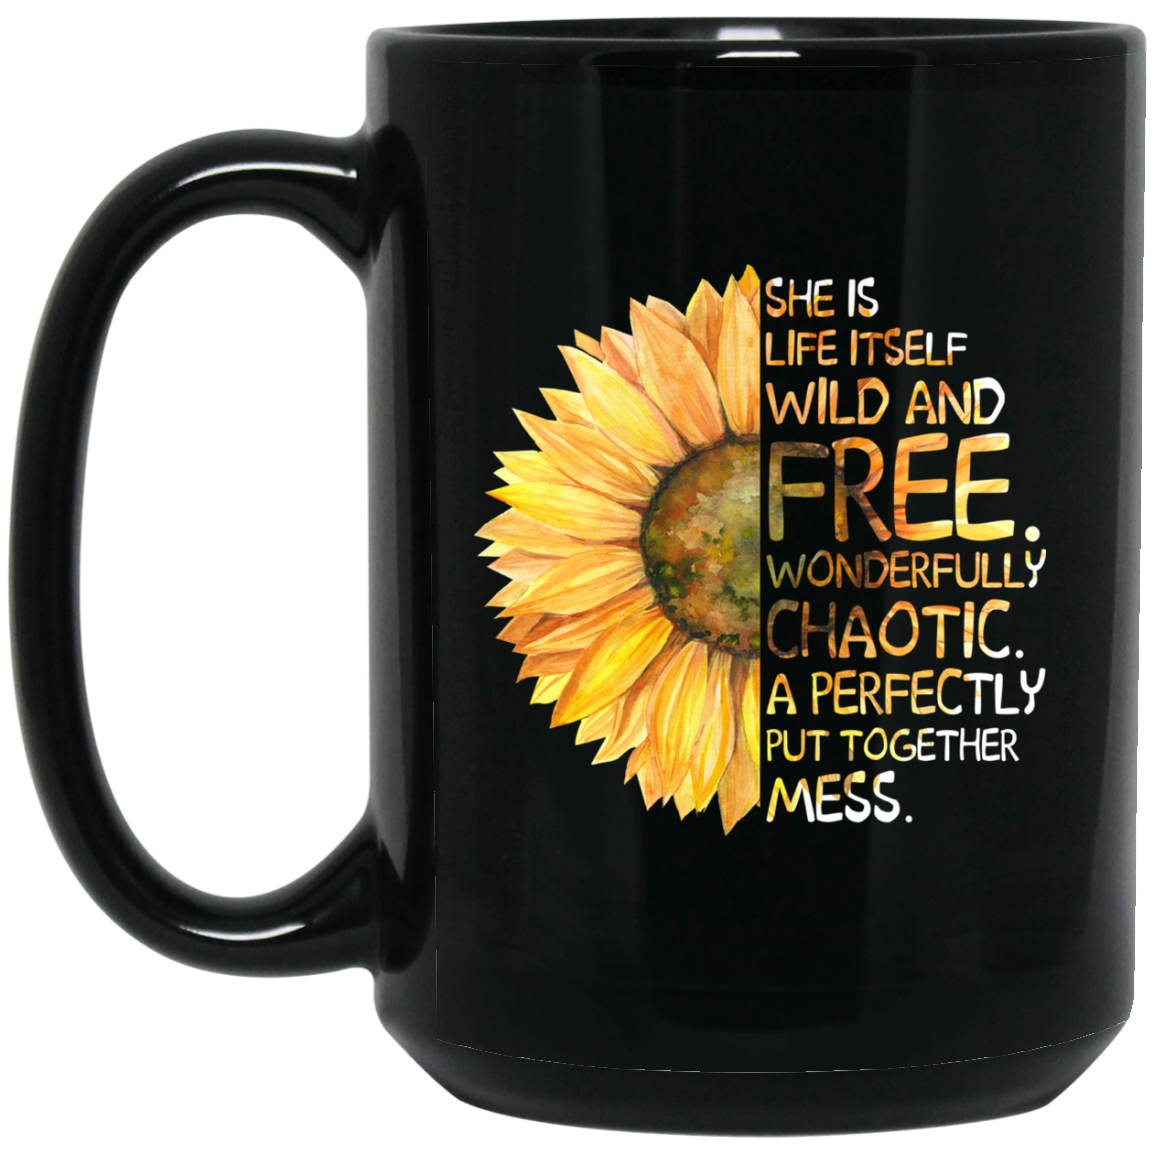 Download She is life itself wild and free wonderfully mugs ...